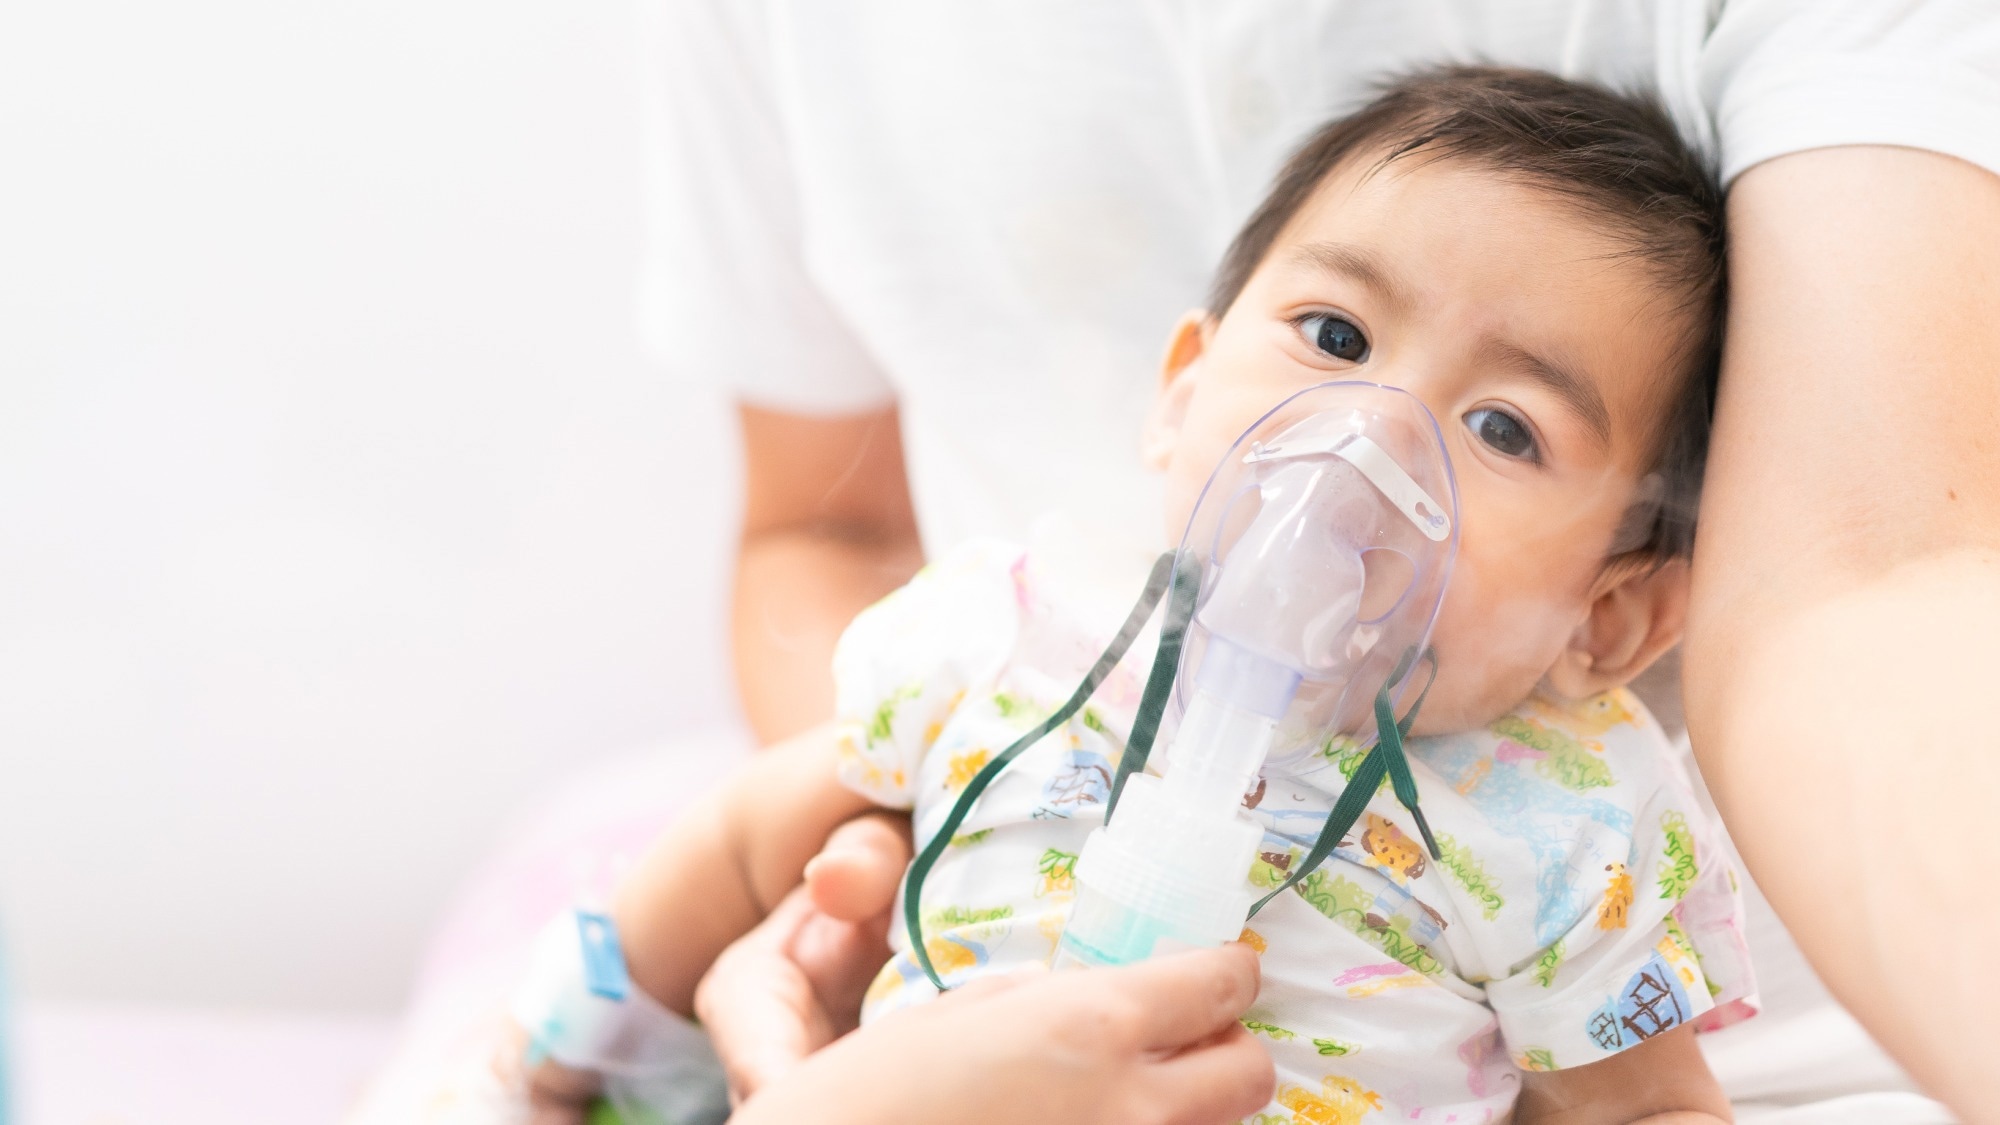 Study finds RSV responsible for most infant hospitalizations in the European Union